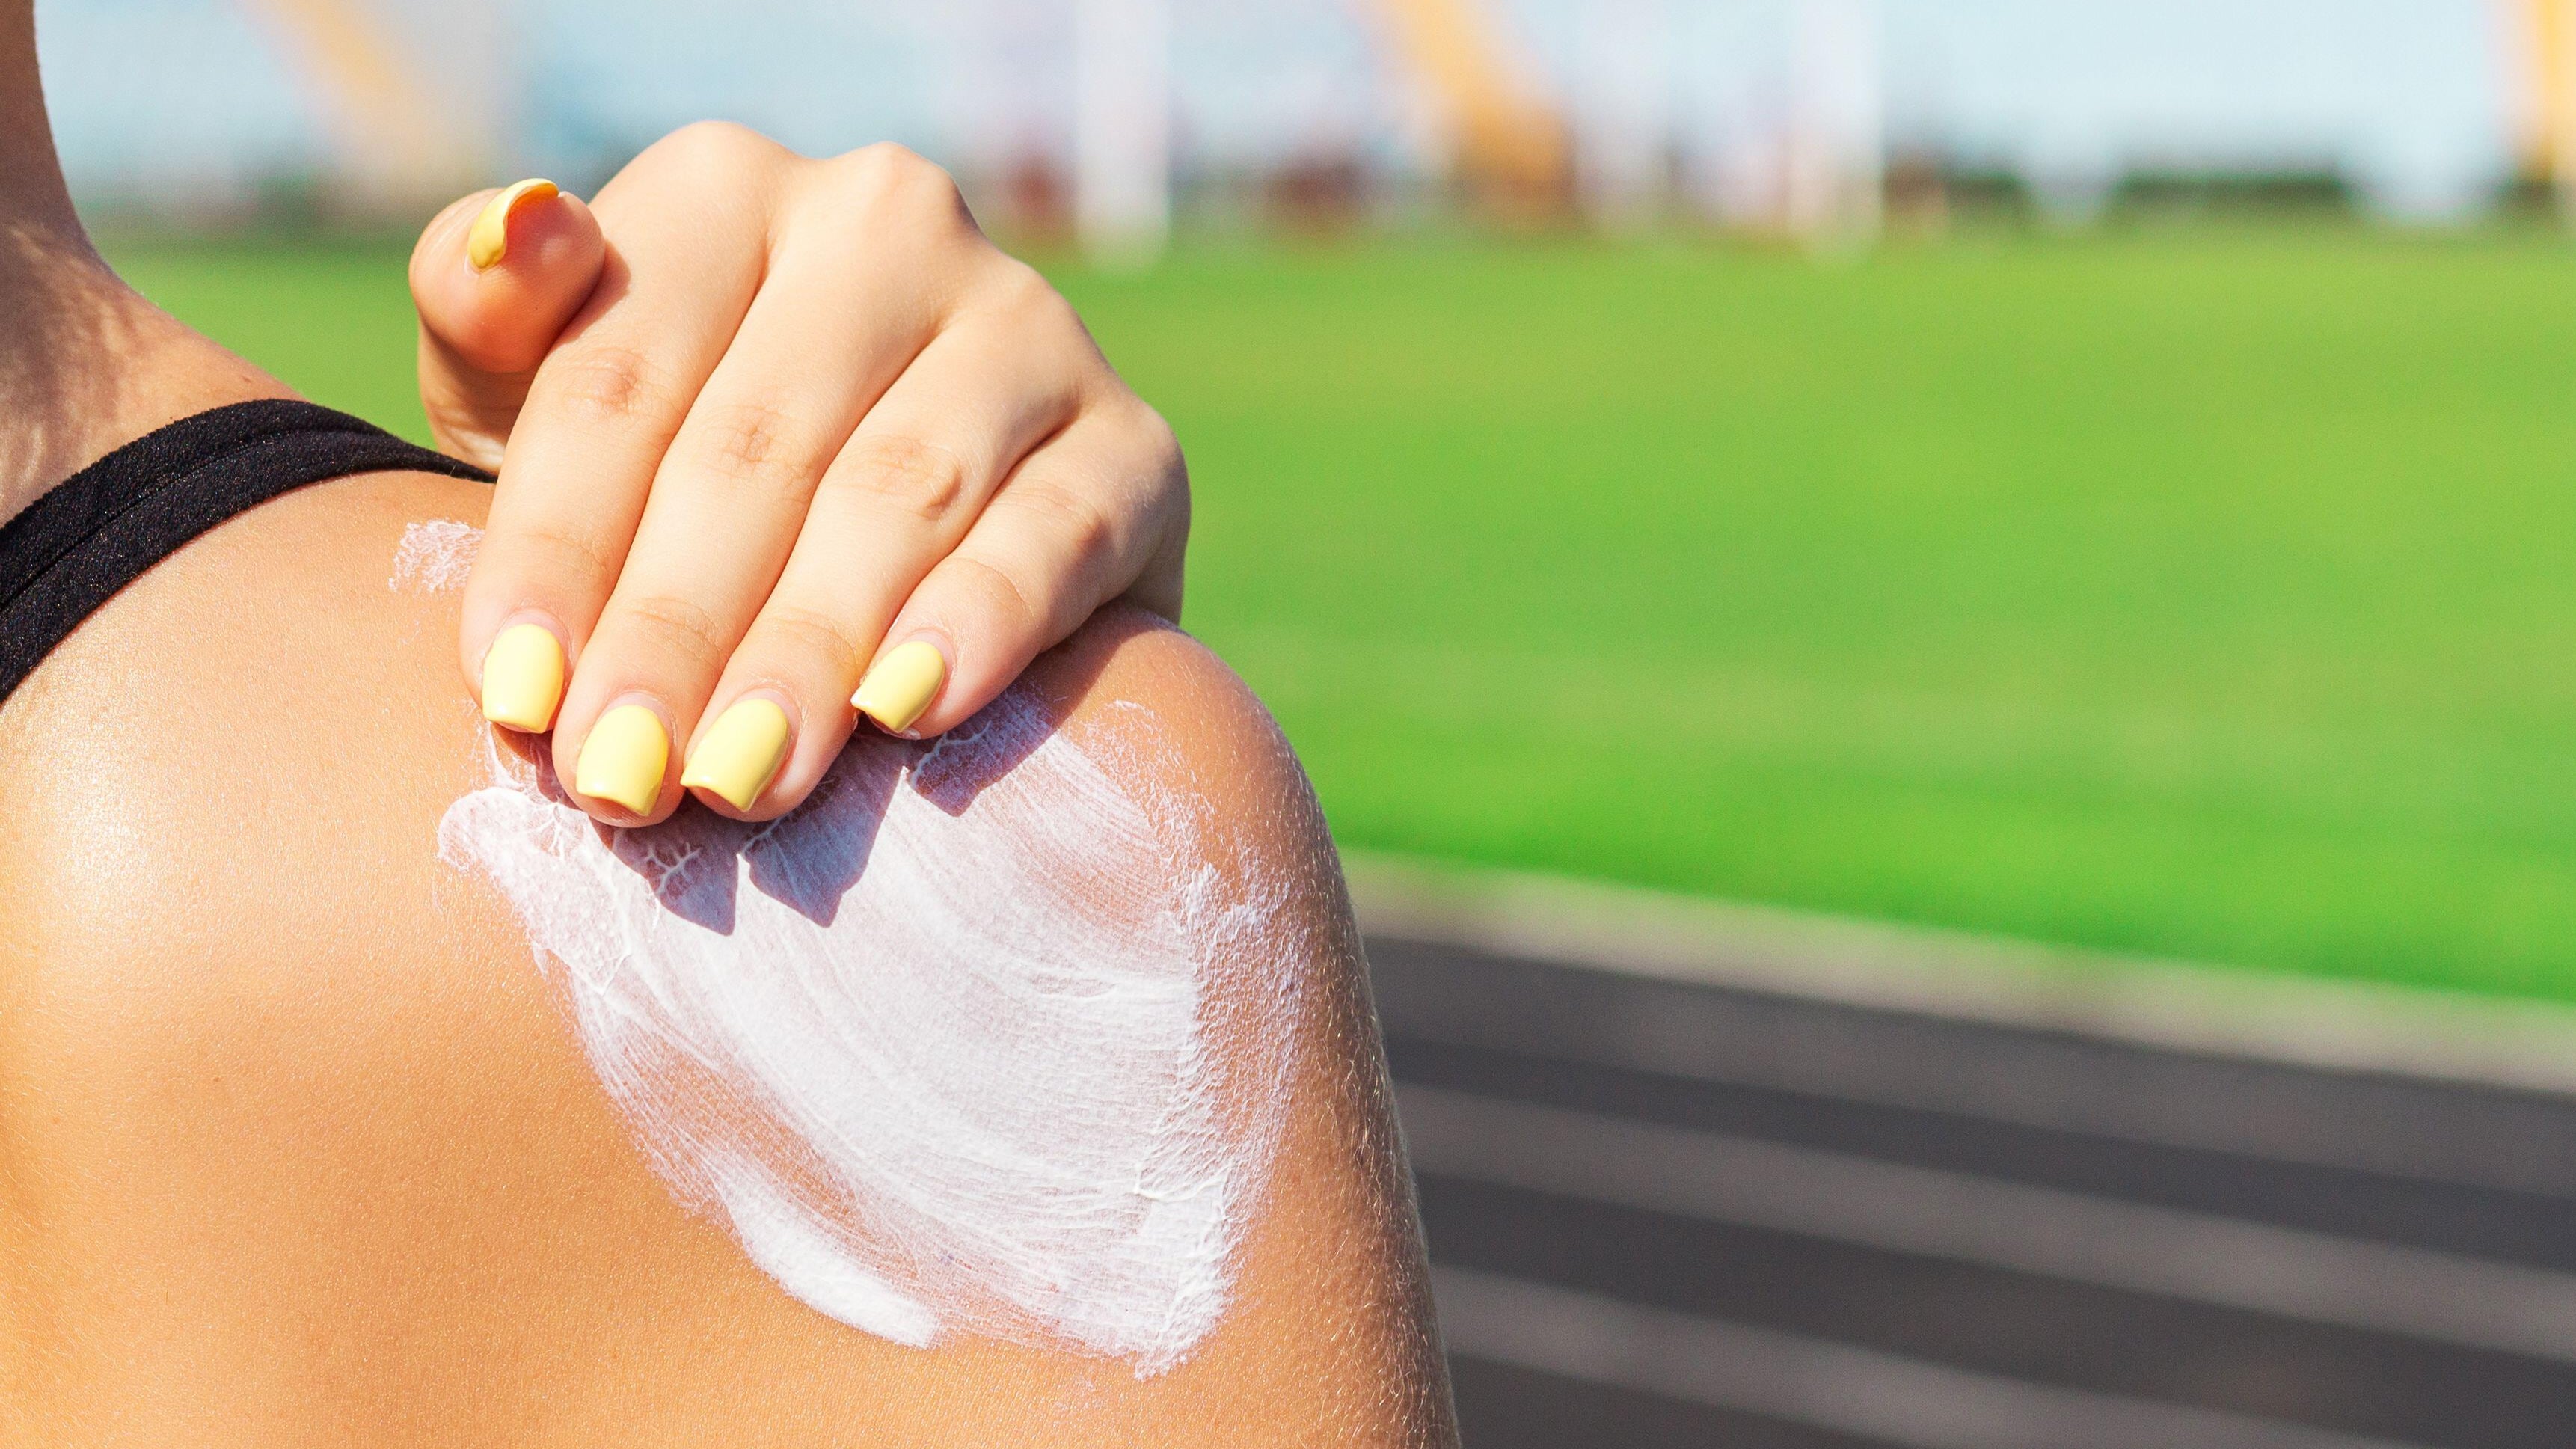 Cancer Research UK recommends using a sunscreen with at least SPF 30 and 4 or 5 stars, applied often